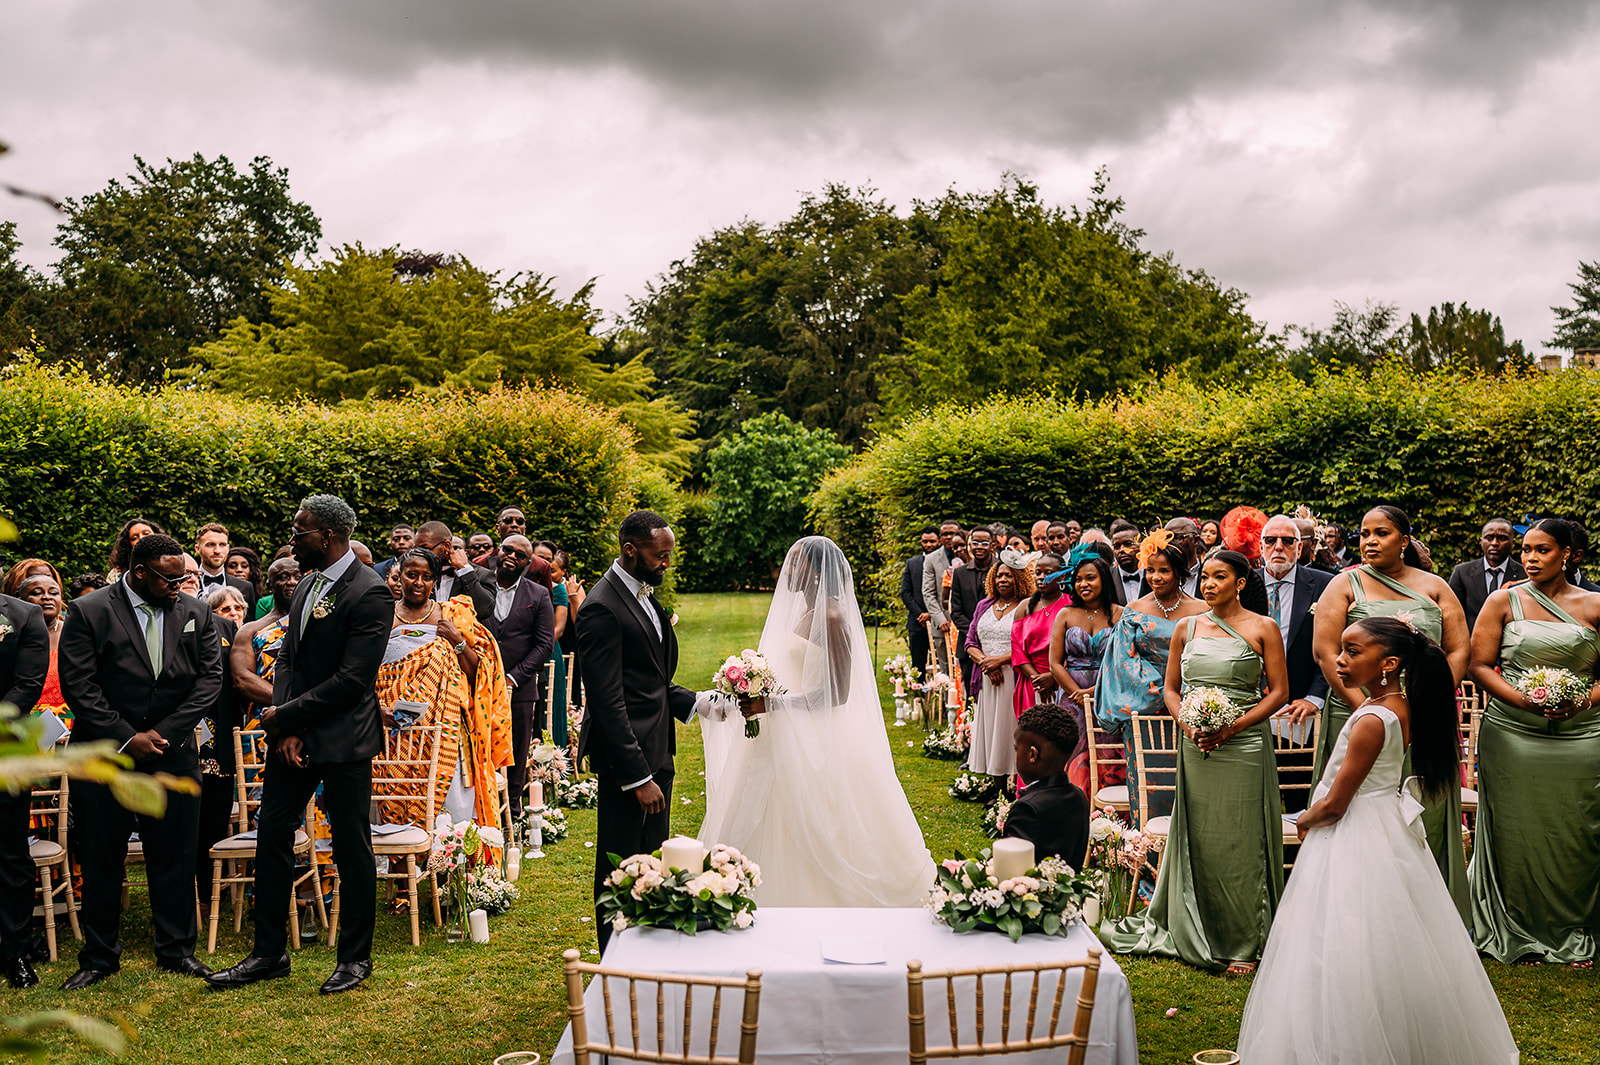 Wedding ceremony in the walled gardens